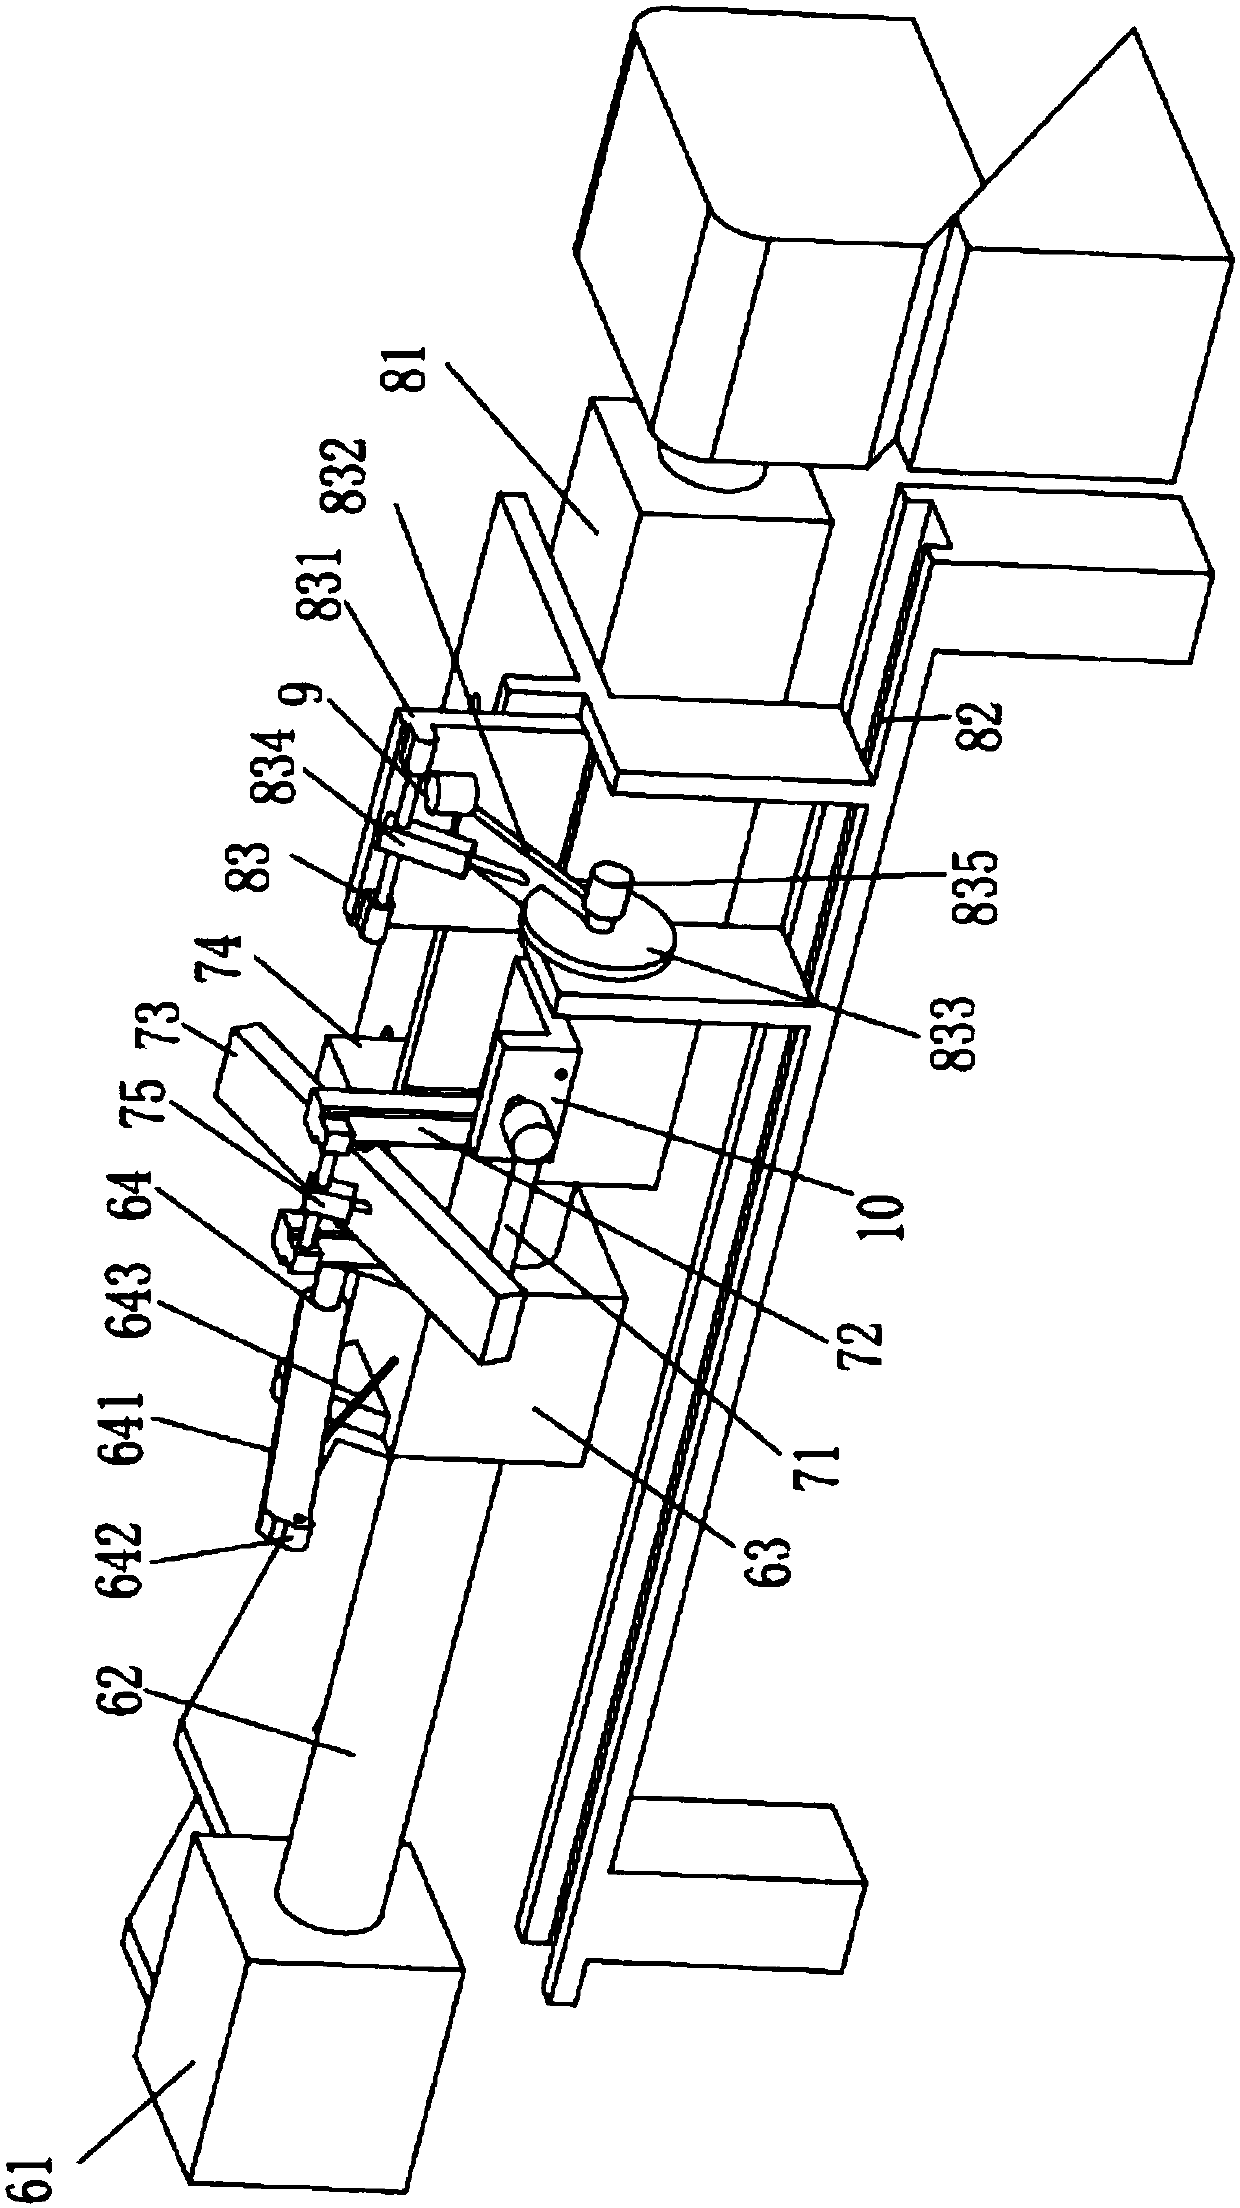 Fixed-length sawing and coding machine of aluminum bars